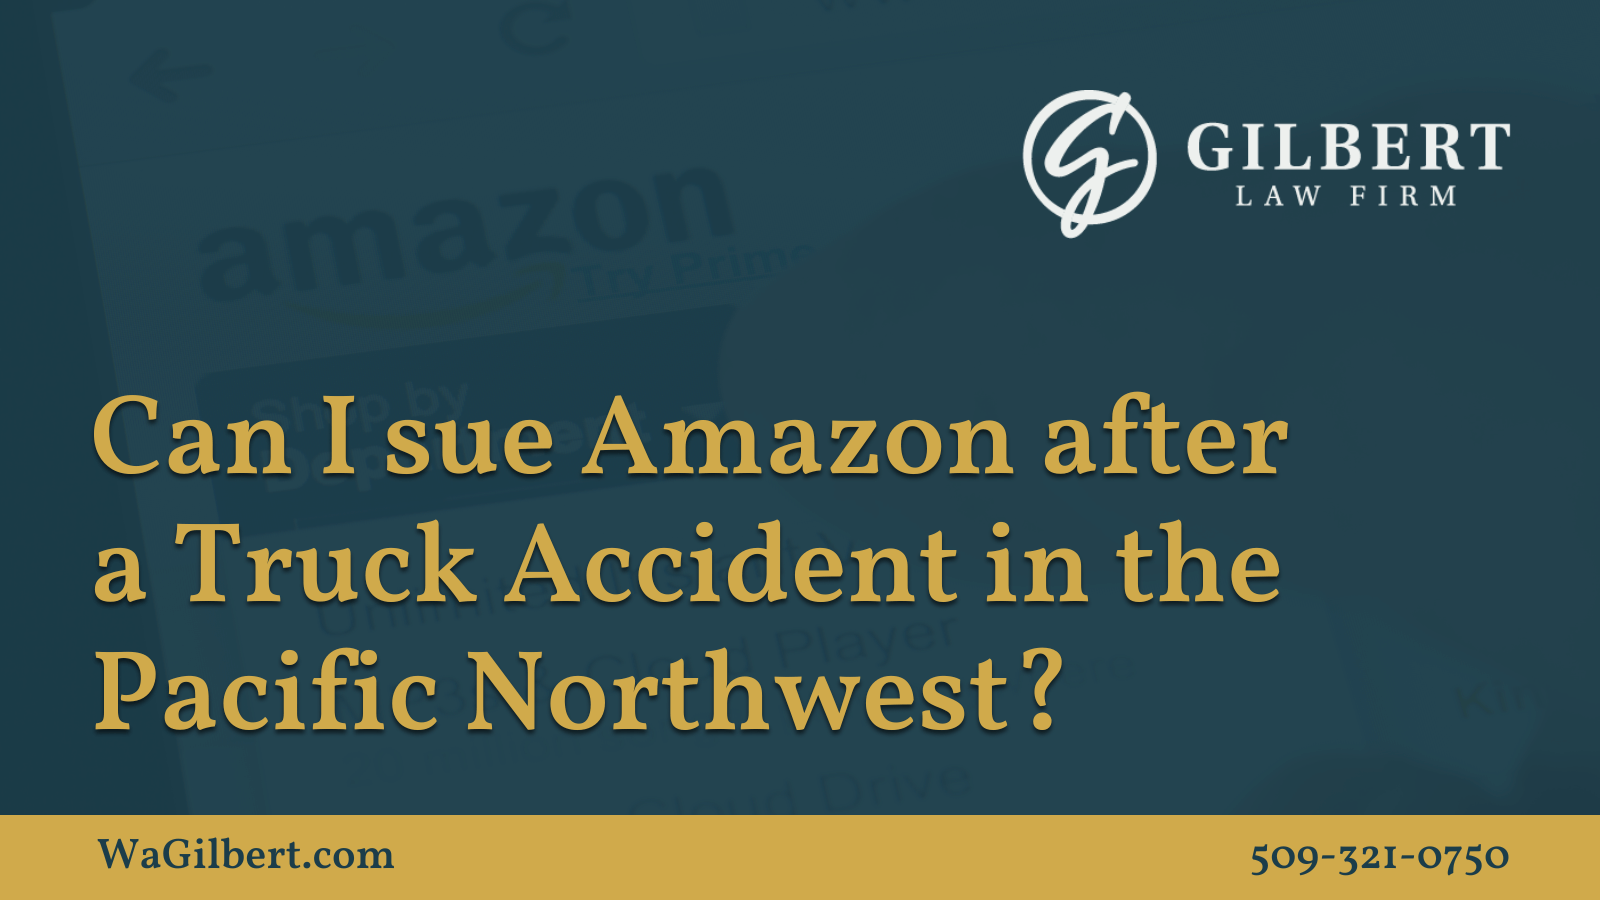 Can I sue Amazon after a Truck Accident in the Pacific Northwest | Gilbert Law Firm Spokane Washington